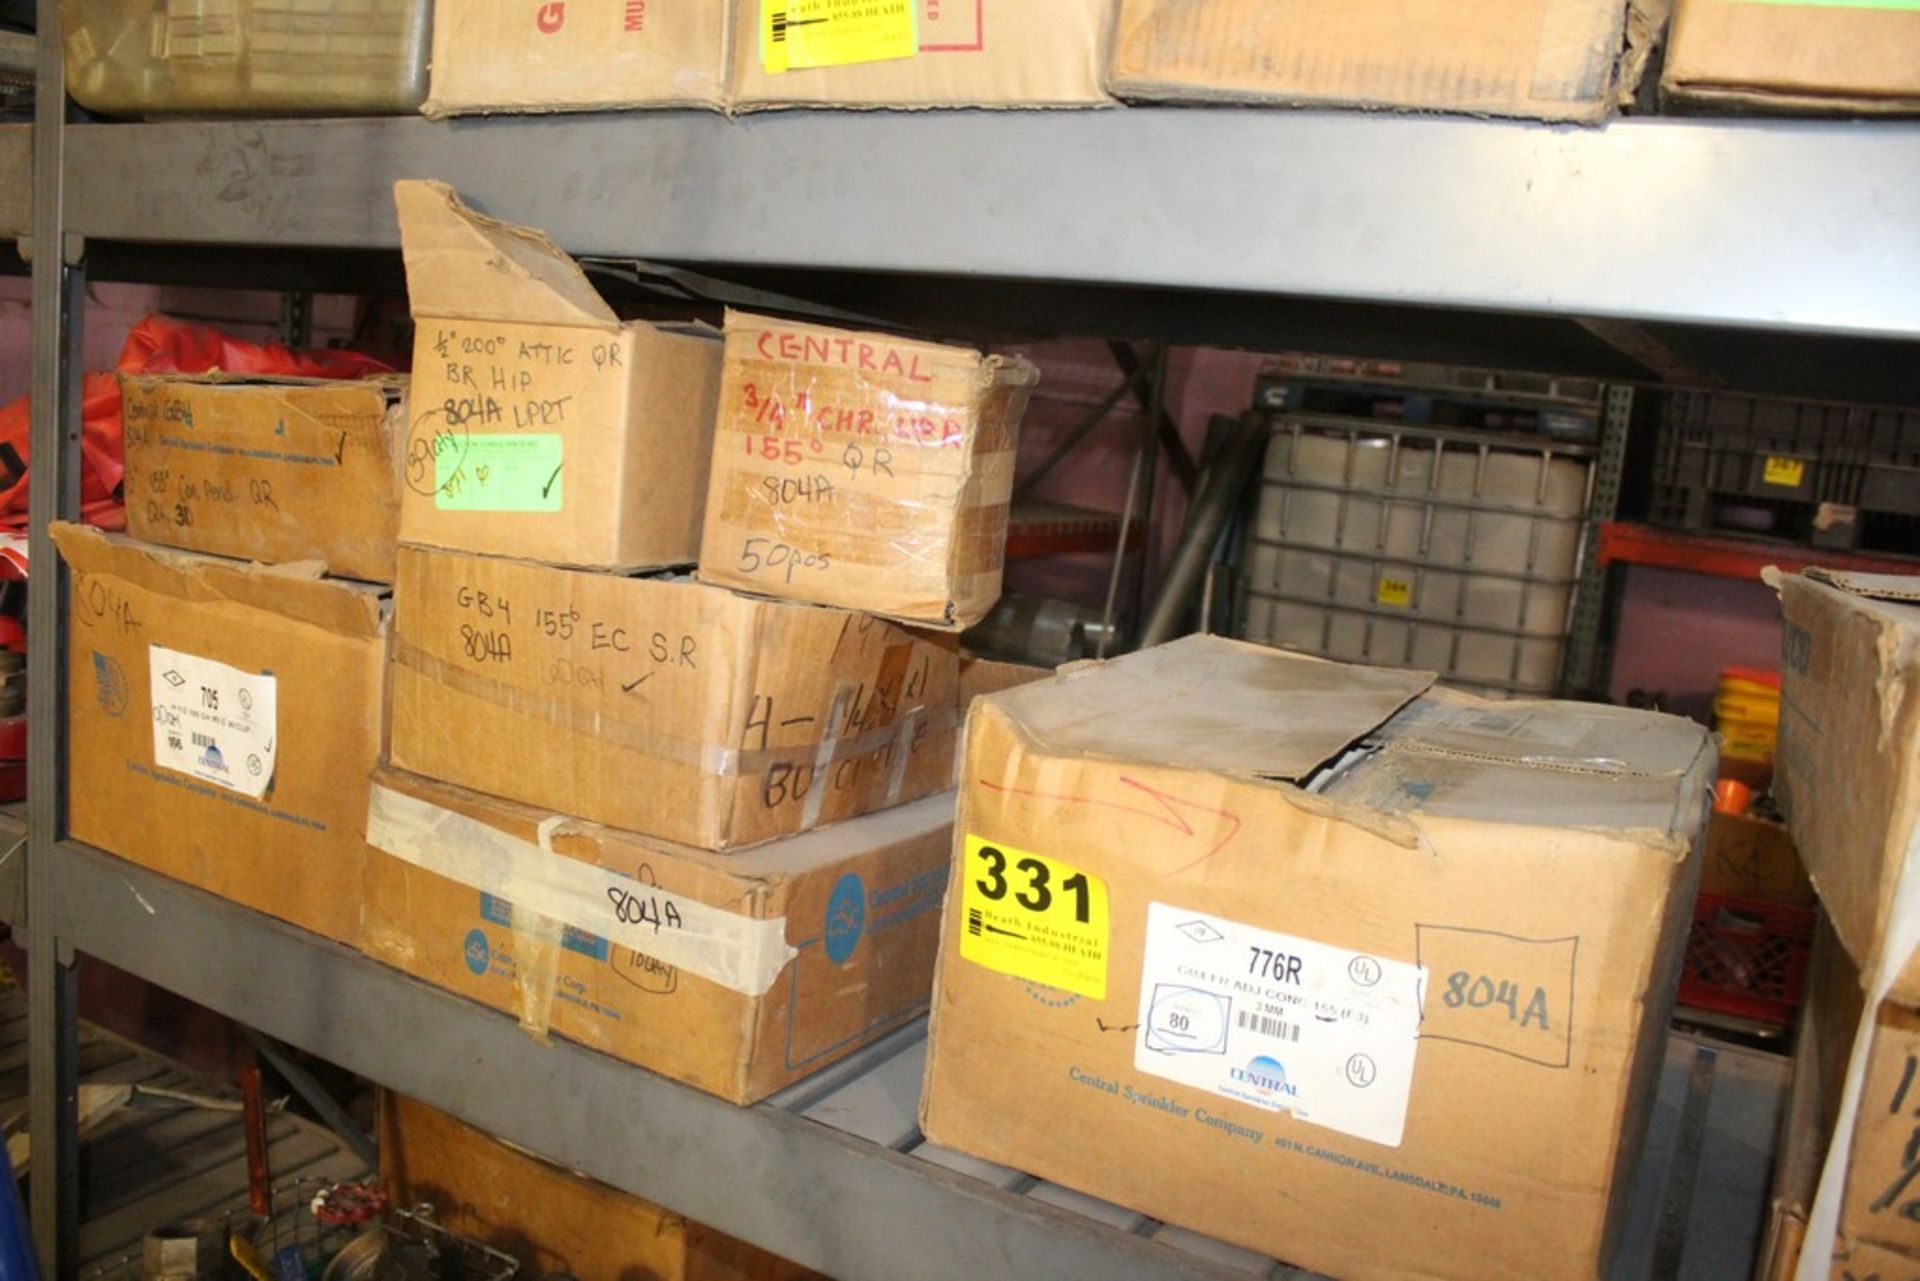 LARGE QTY OF PIPE FITTINGS & SUPPLIES ON SHELF